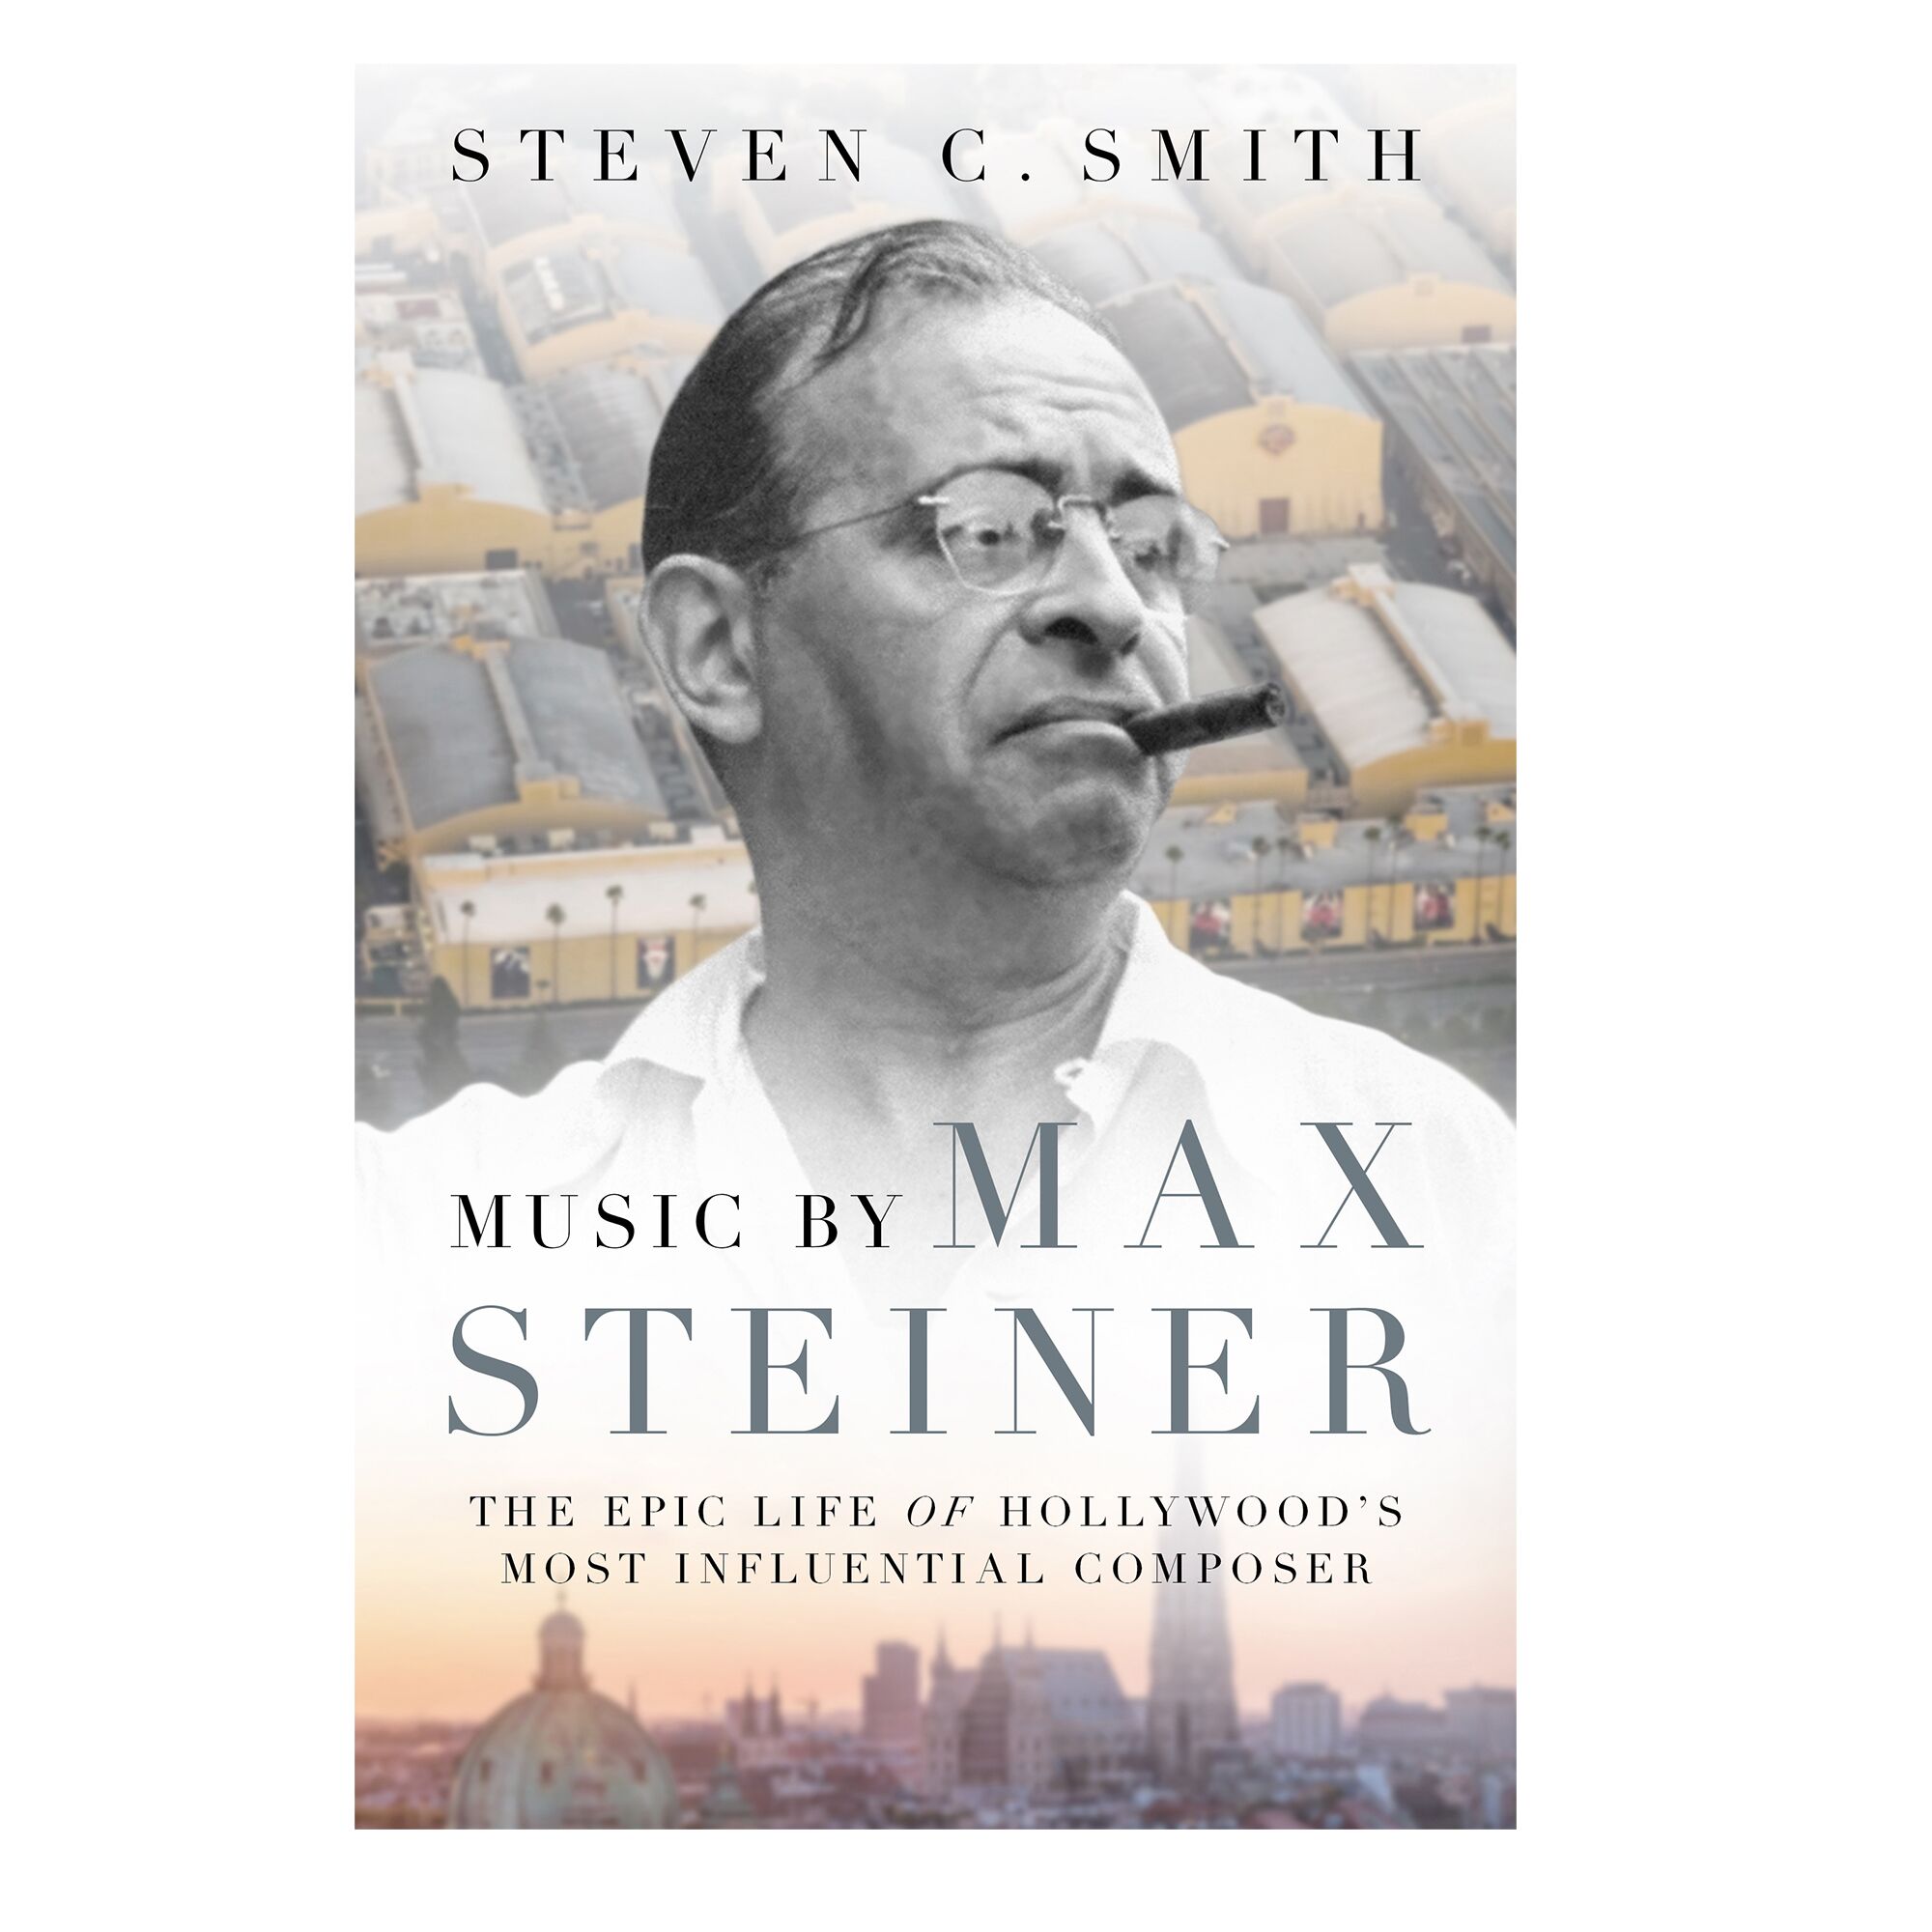 "Music by Max Steiner: The Epic Life of Hollywood's Most Influential Composer," by Steven C. Smith